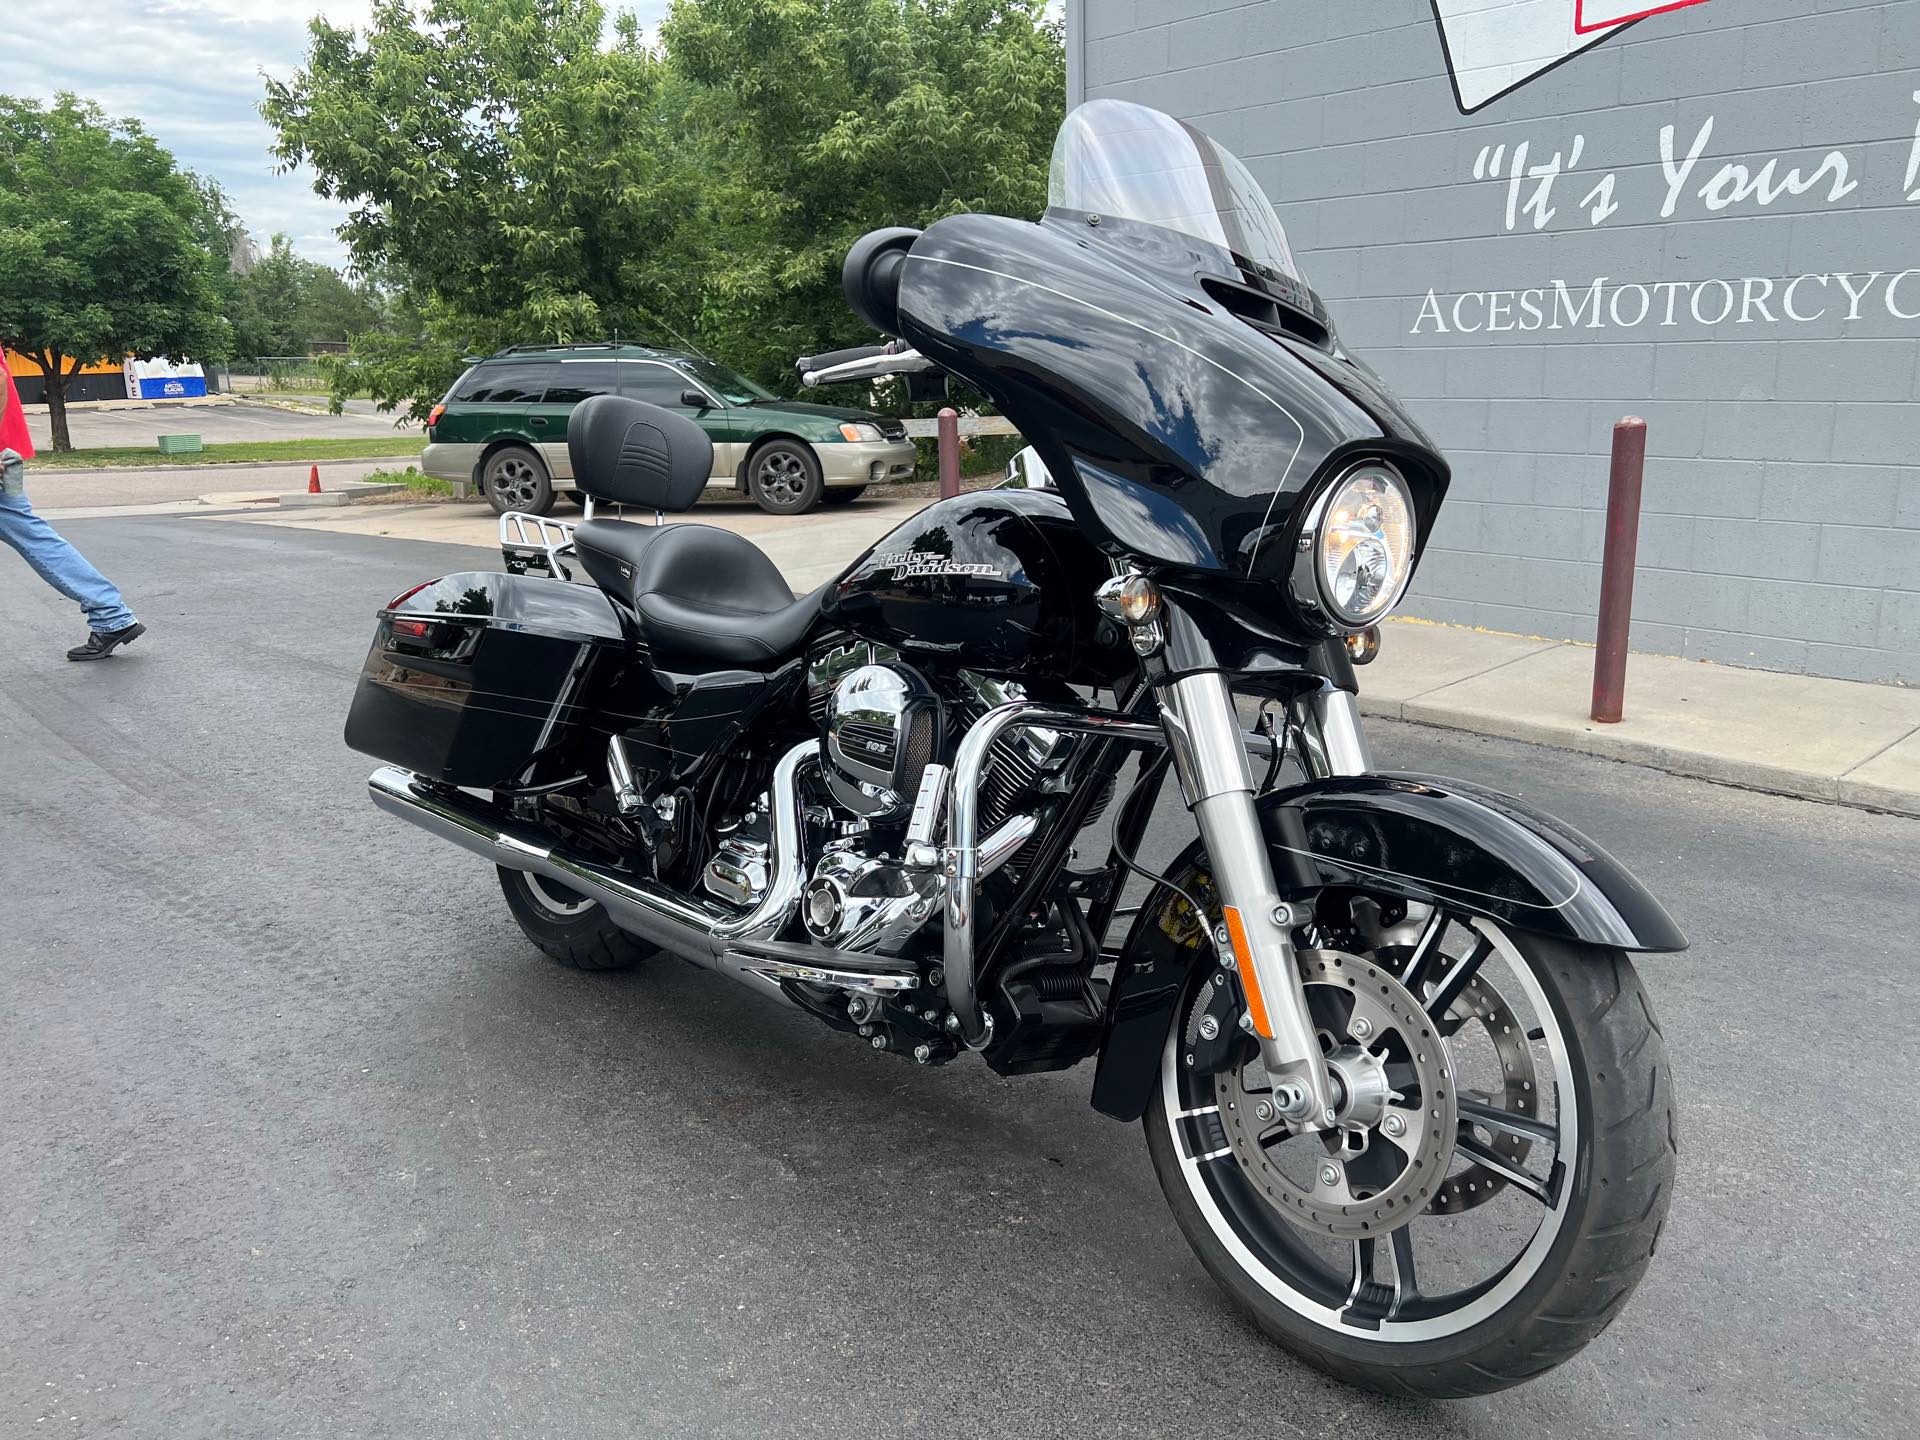 2014 Harley-Davidson Street Glide Special at Aces Motorcycles - Fort Collins